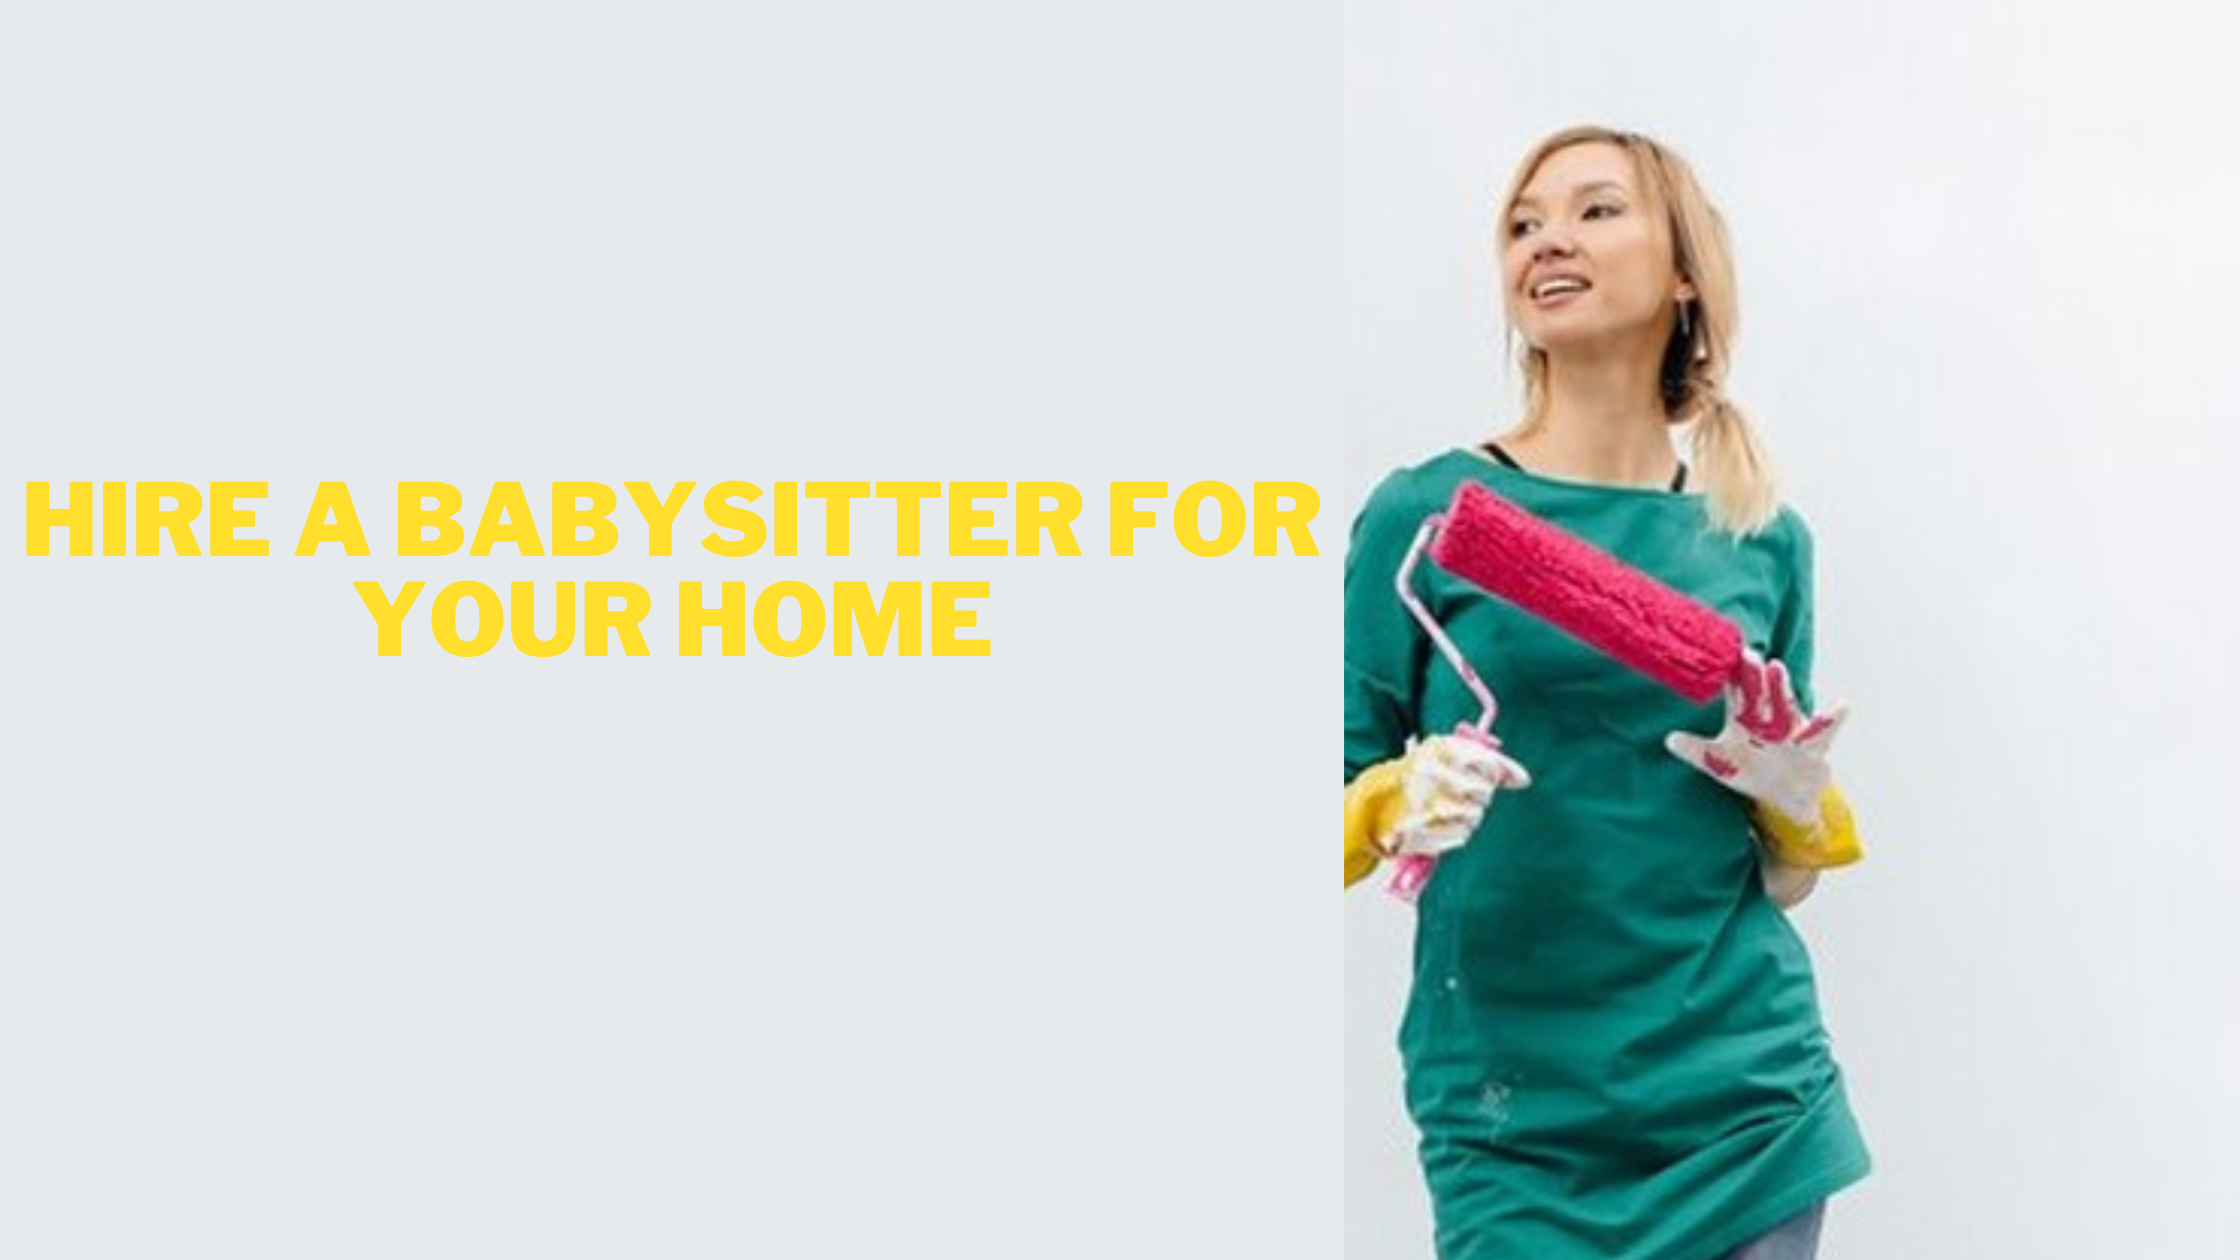 Our BabySitter maid service is designed to match you with the best babysitter for your needs,